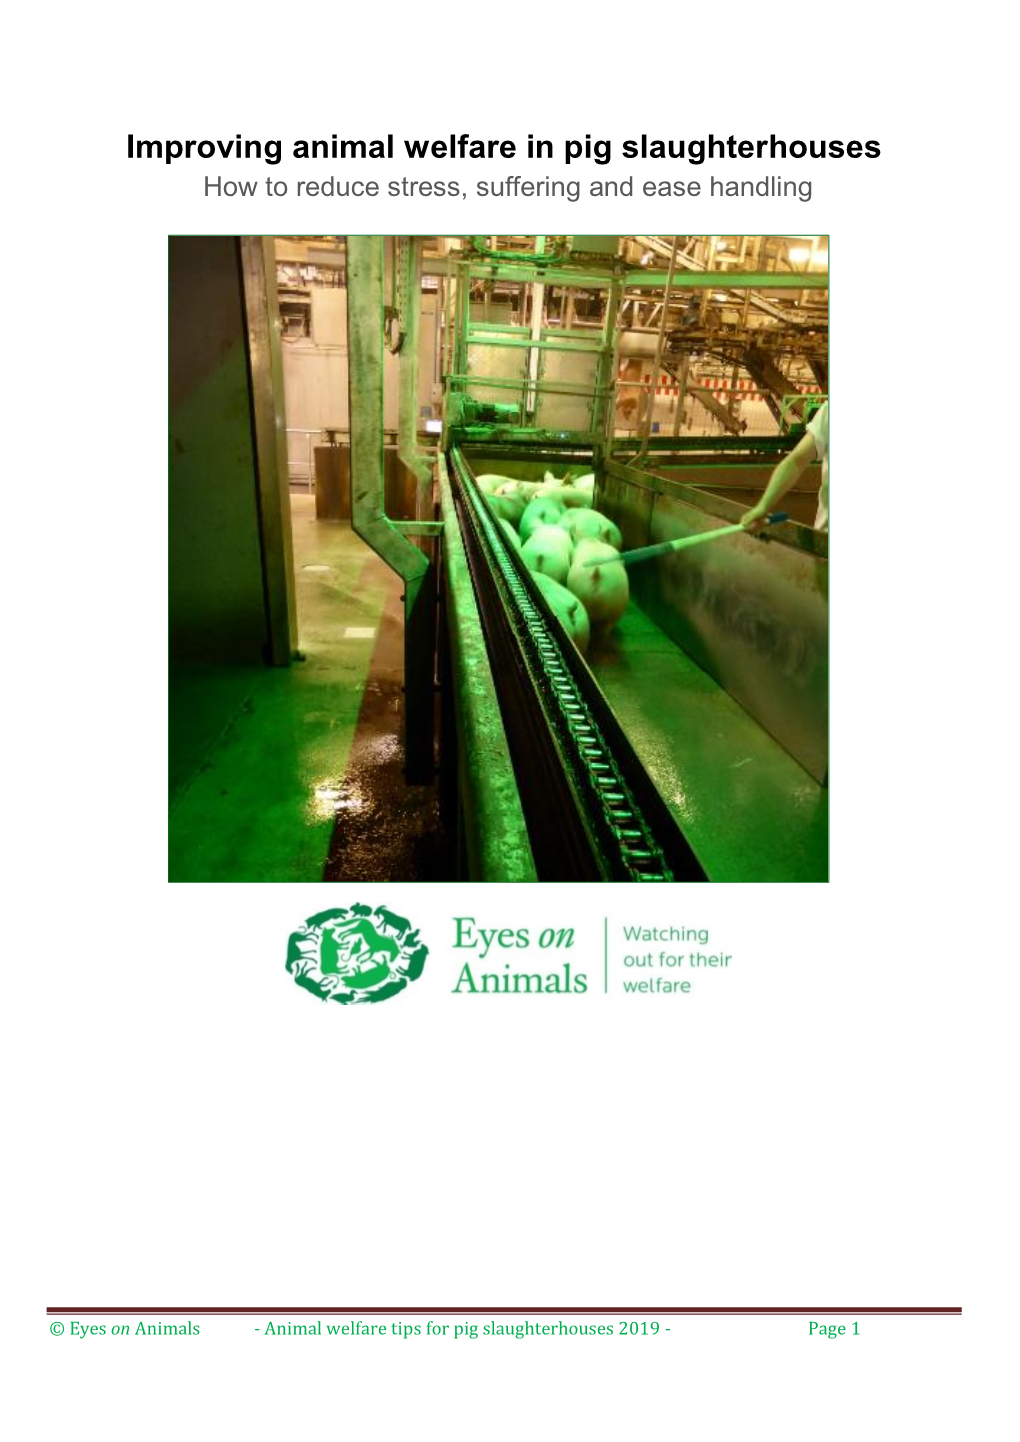 Improving Animal Welfare in Pig Slaughterhouses How to Reduce Stress, Suffering and Ease Handling